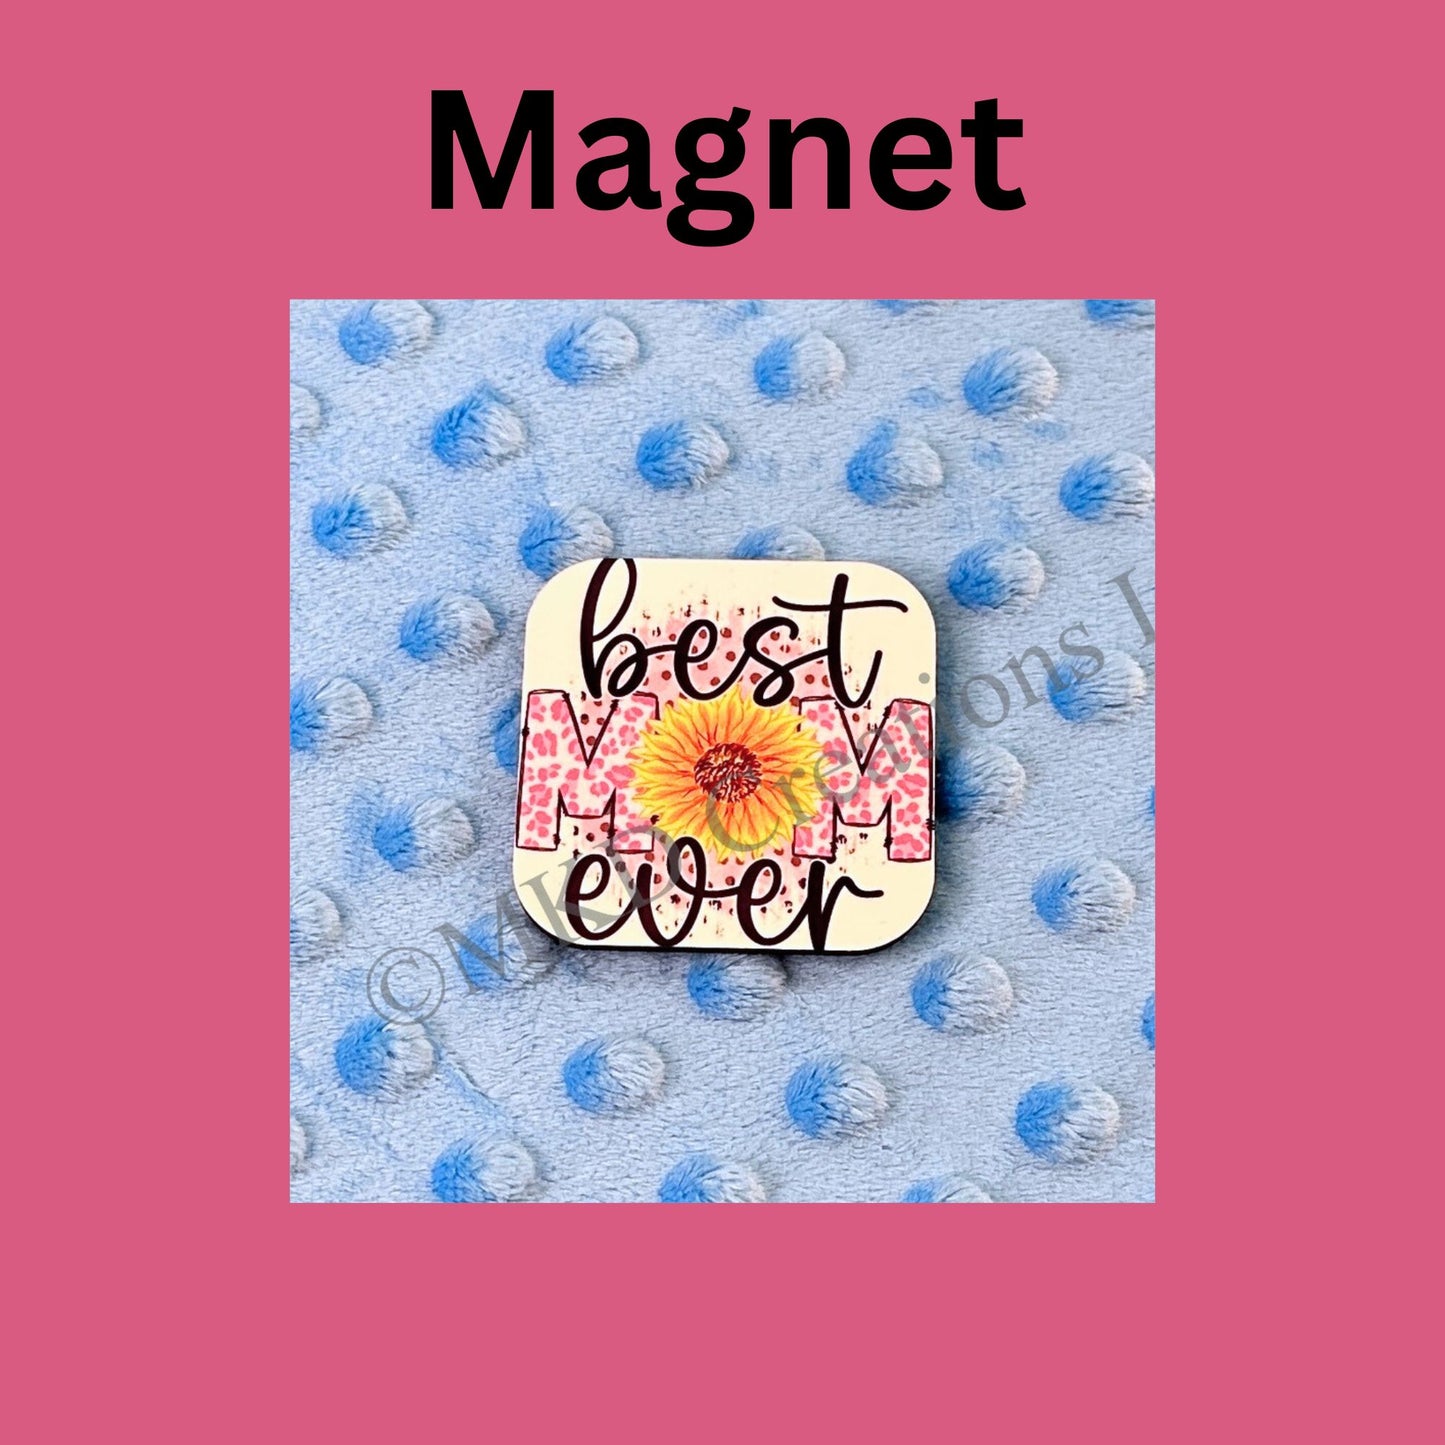 Best Mom Ever, Mother's Day, Gift Set, Coaster, Magnet, Keychain, Car Coaster